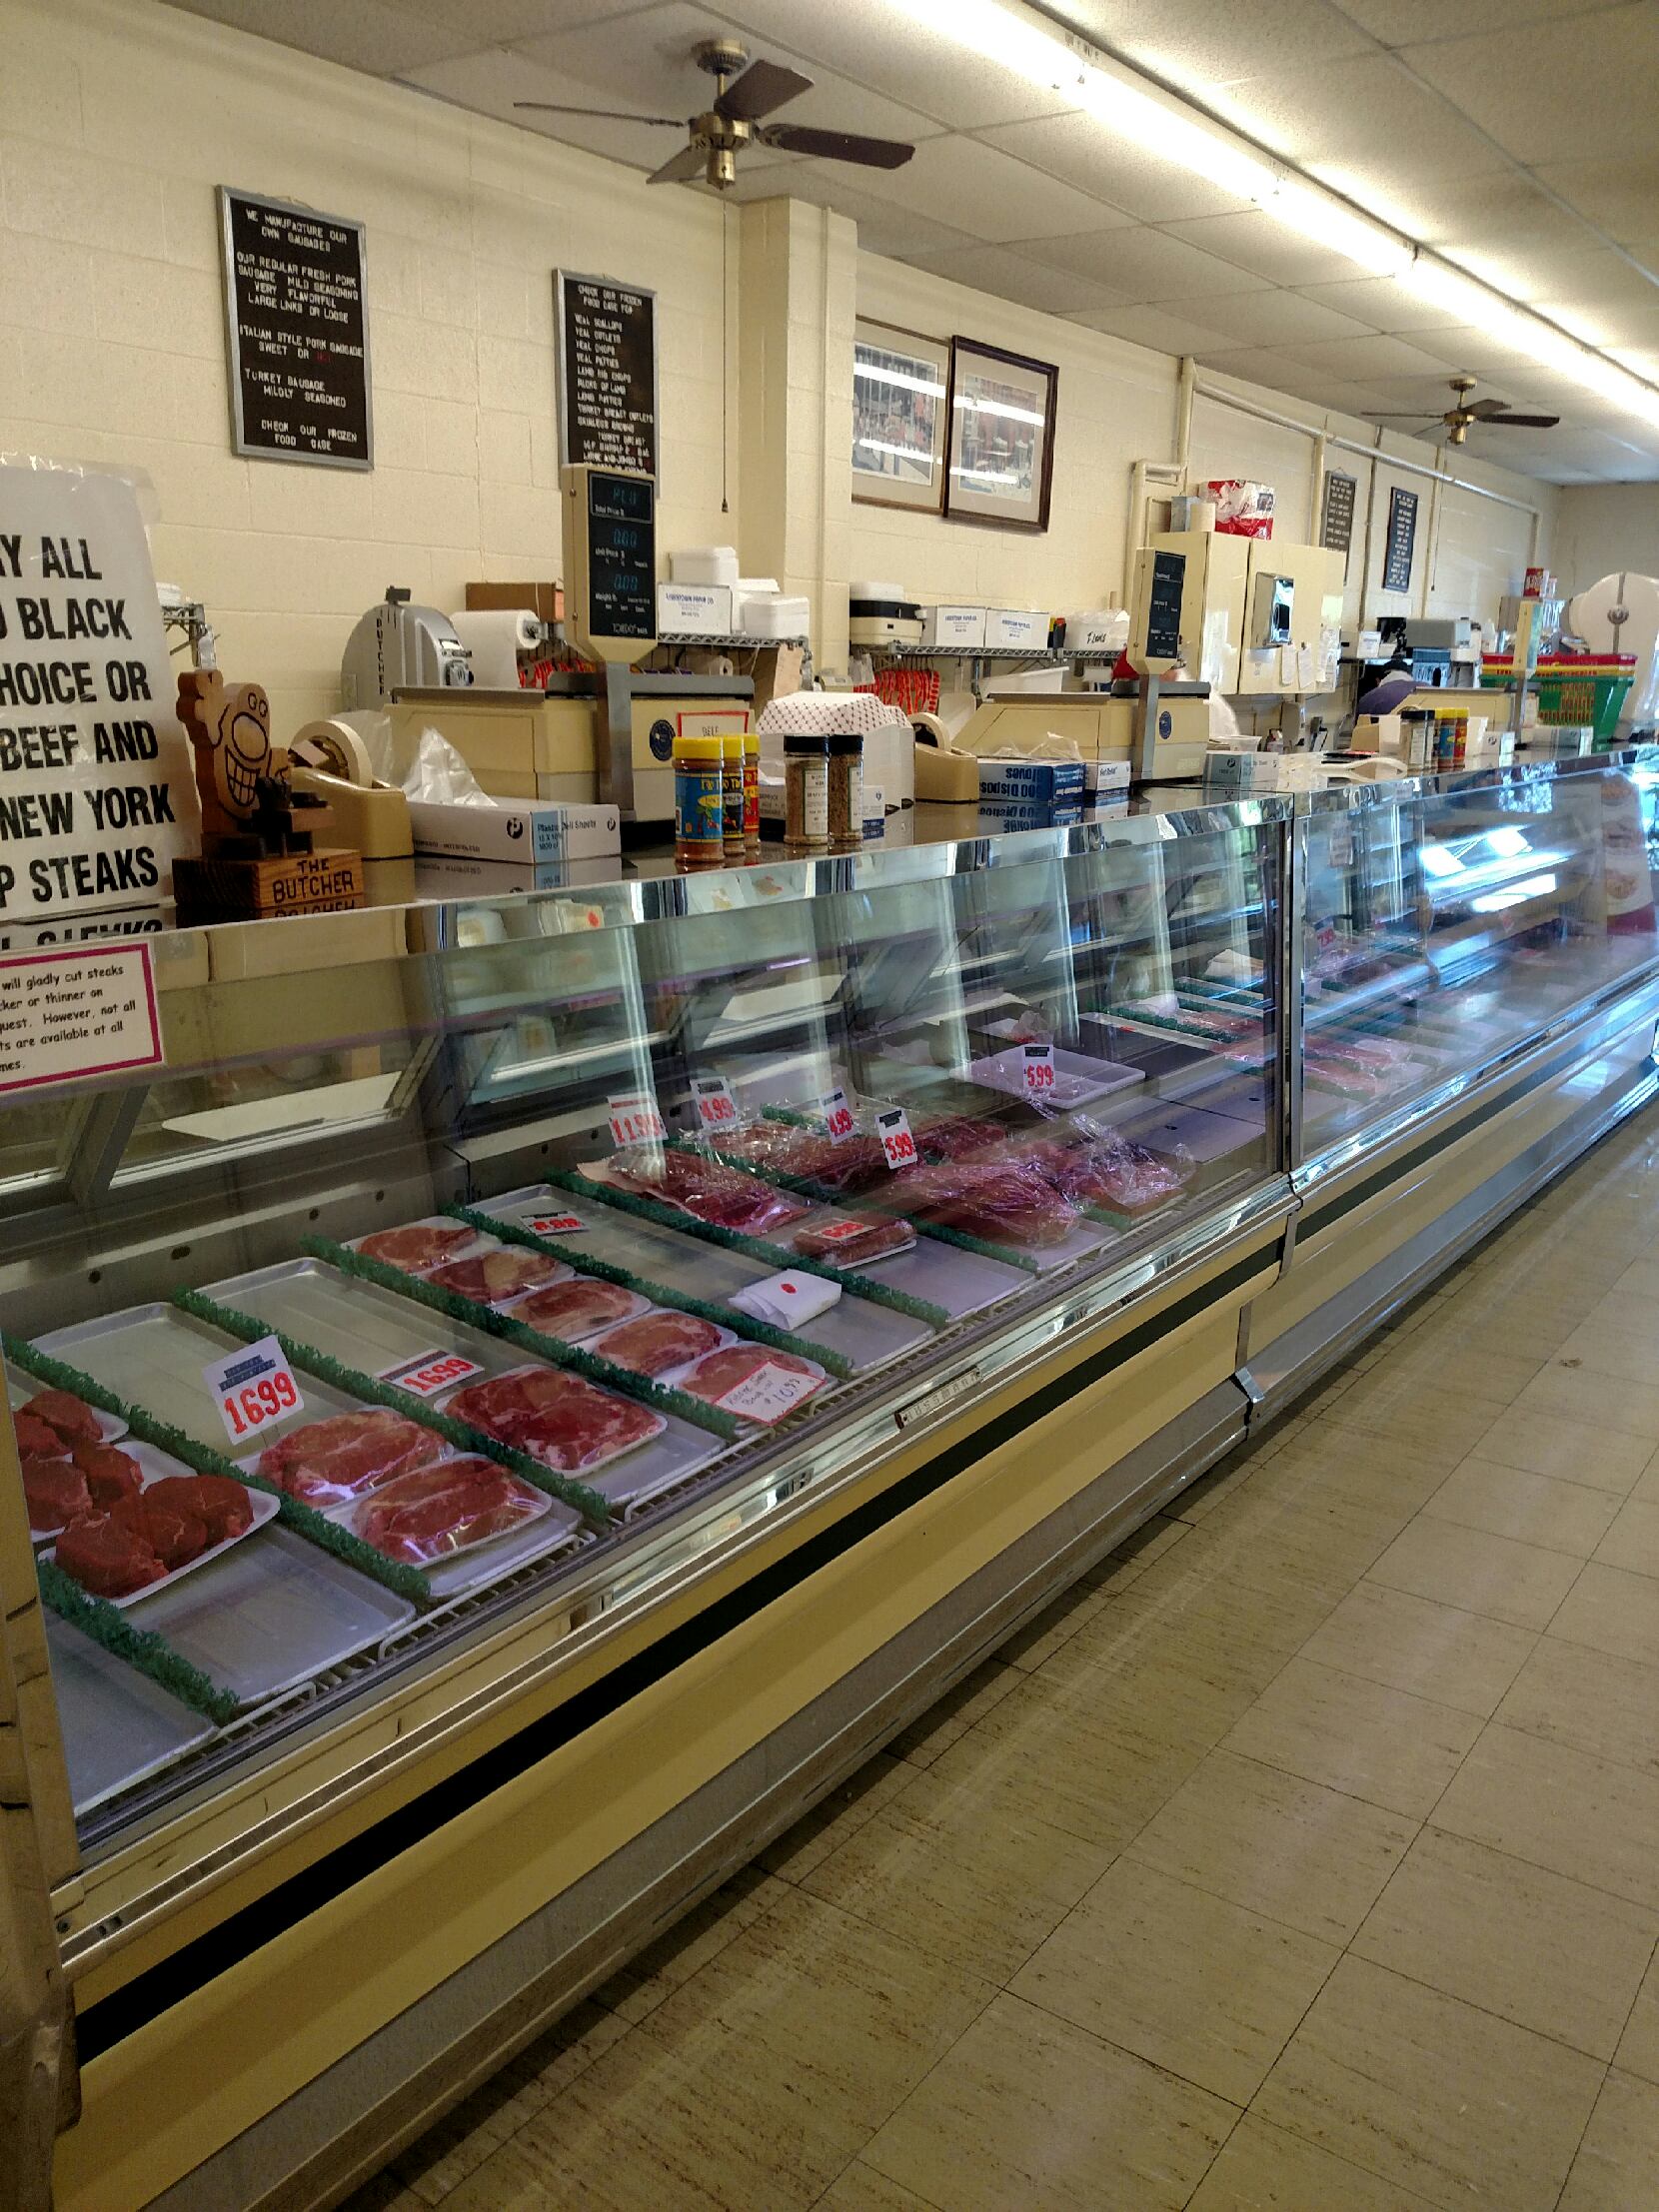 Prime Cut Meat, Superior Meats, York, PA